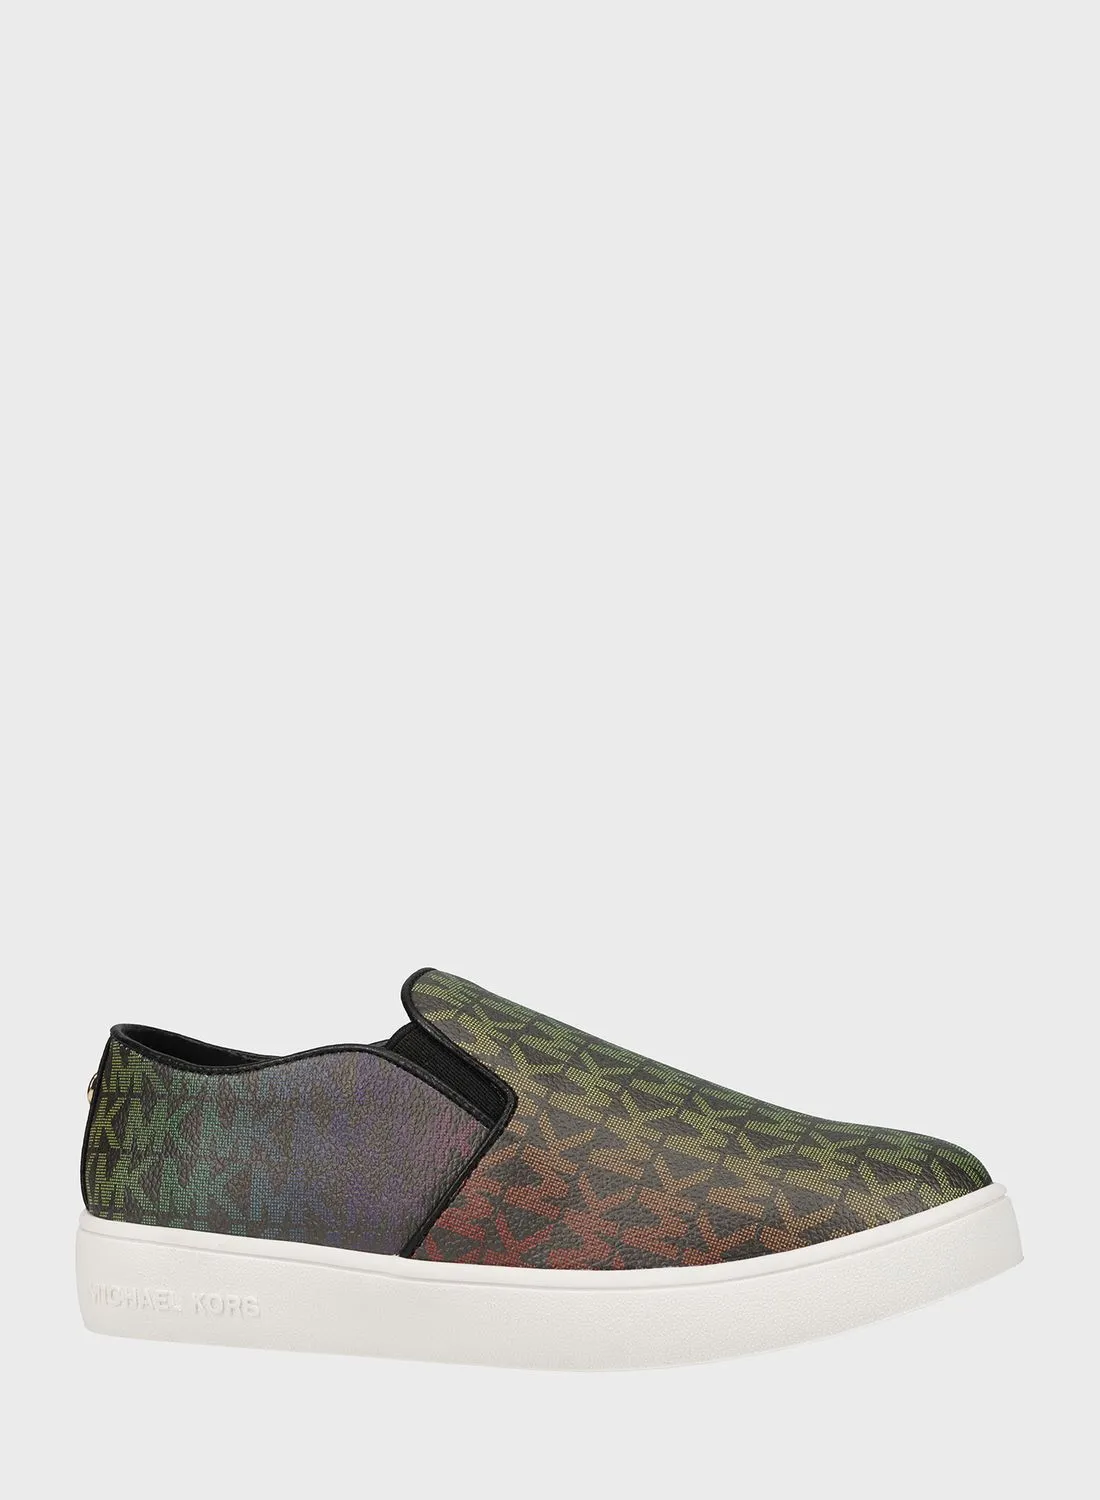 Michael Kors Youth Jem Castro Low Top Sneakers